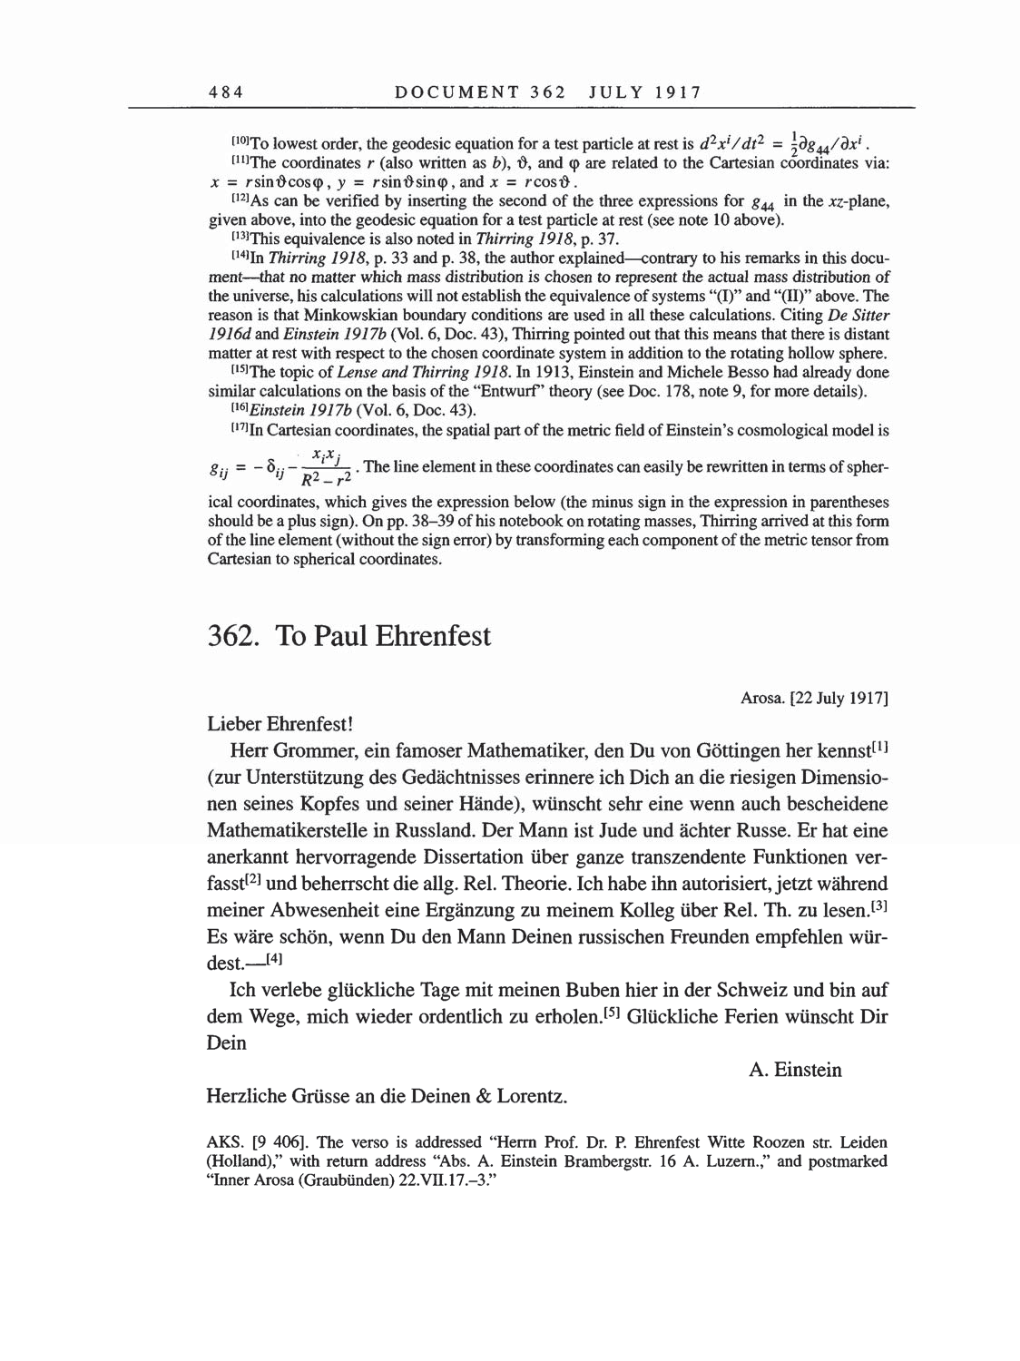 Volume 8, Part A: The Berlin Years: Correspondence 1914-1917 page 484